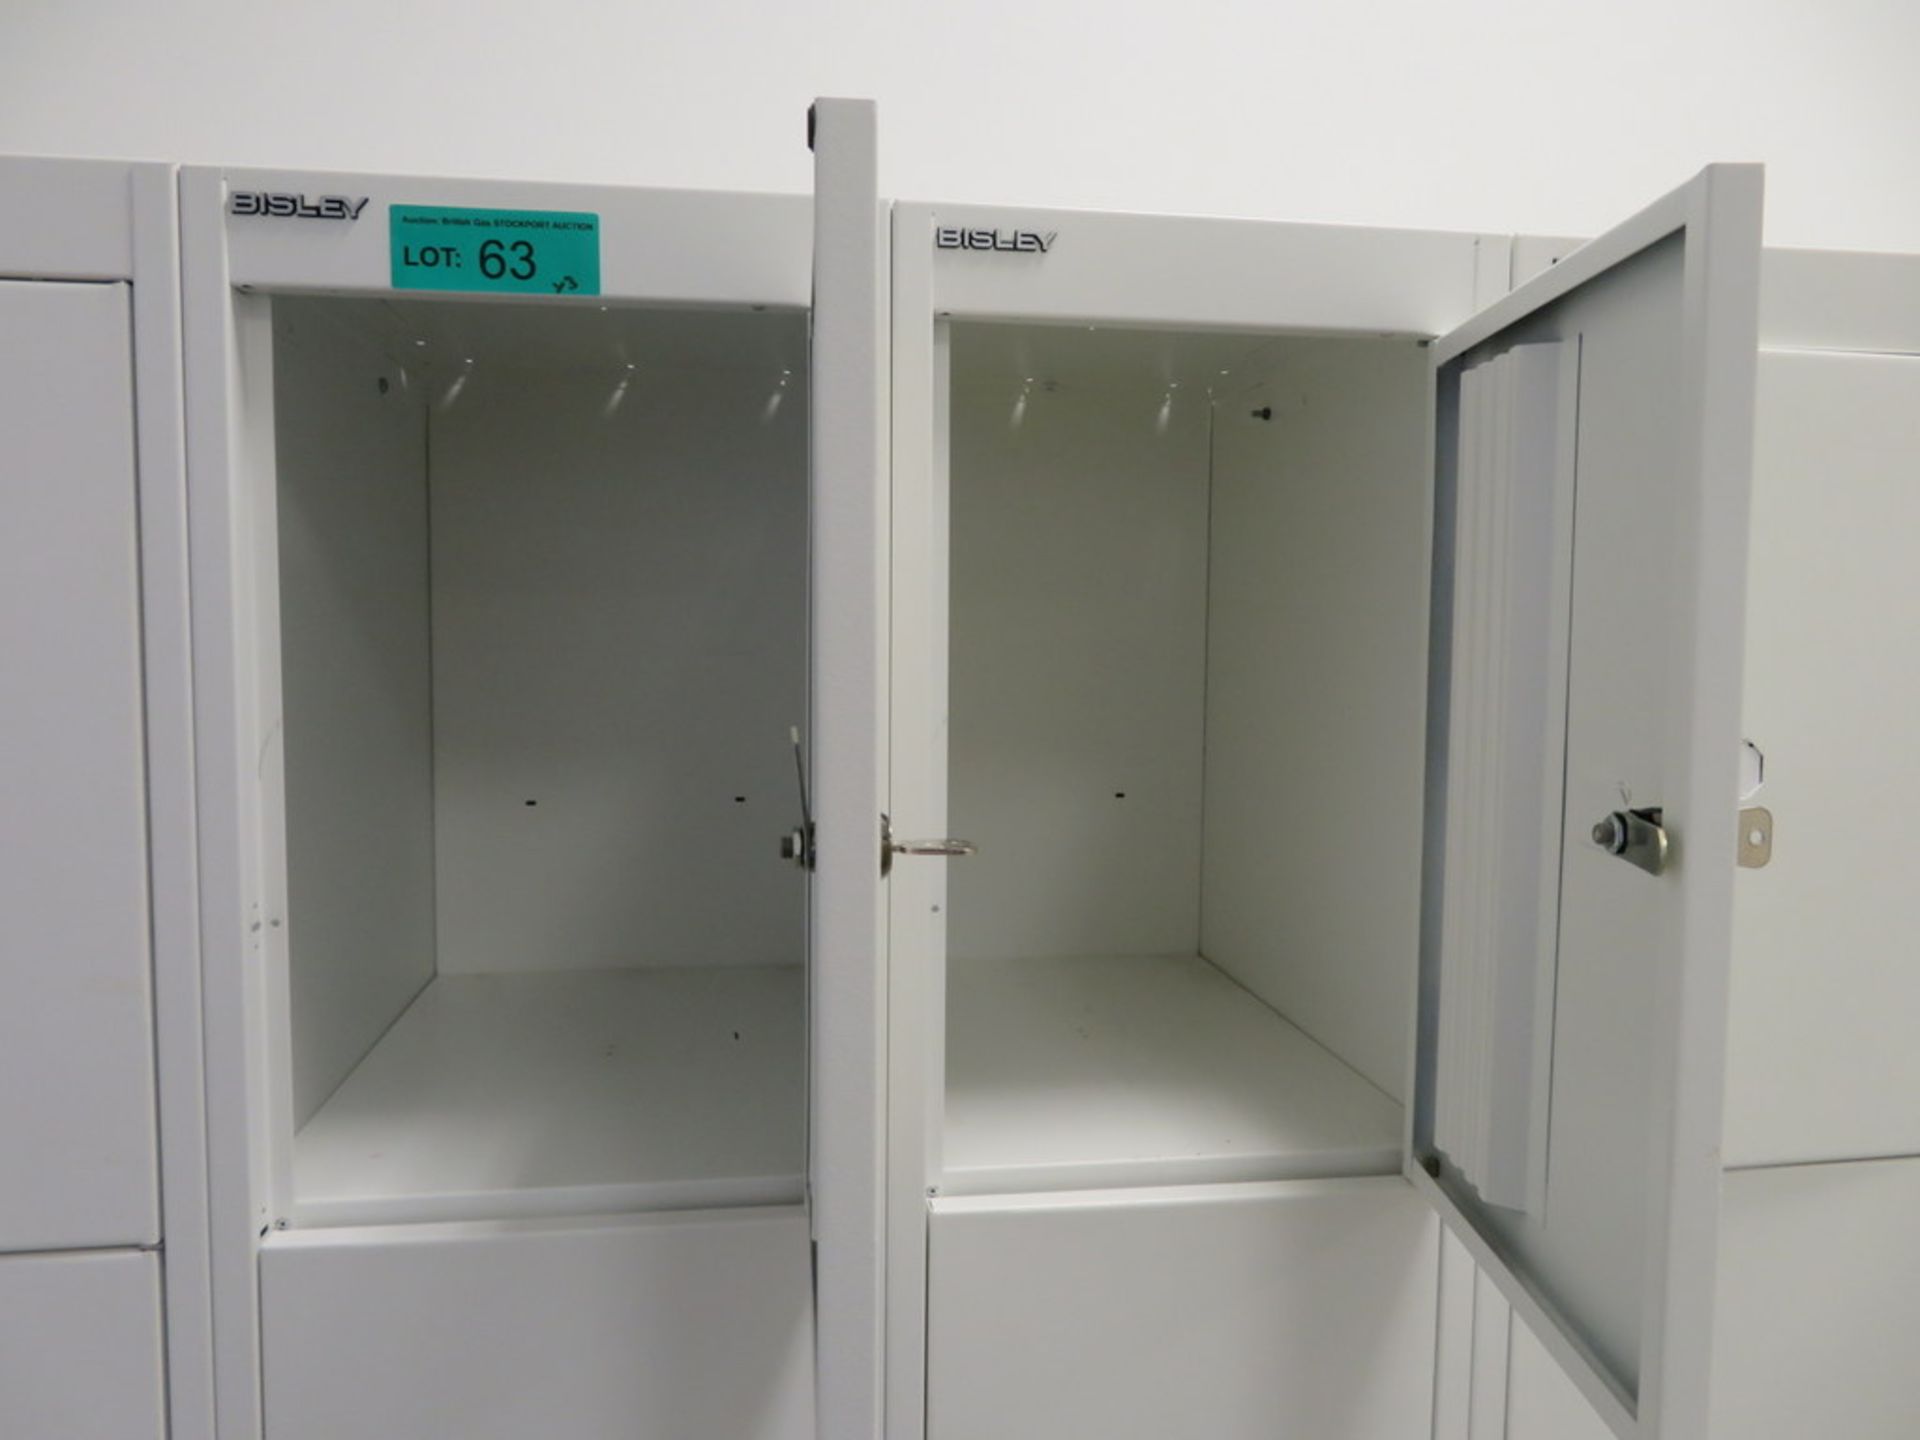 3x Bisley 4 Compartment Personnel Locker. - Image 3 of 3